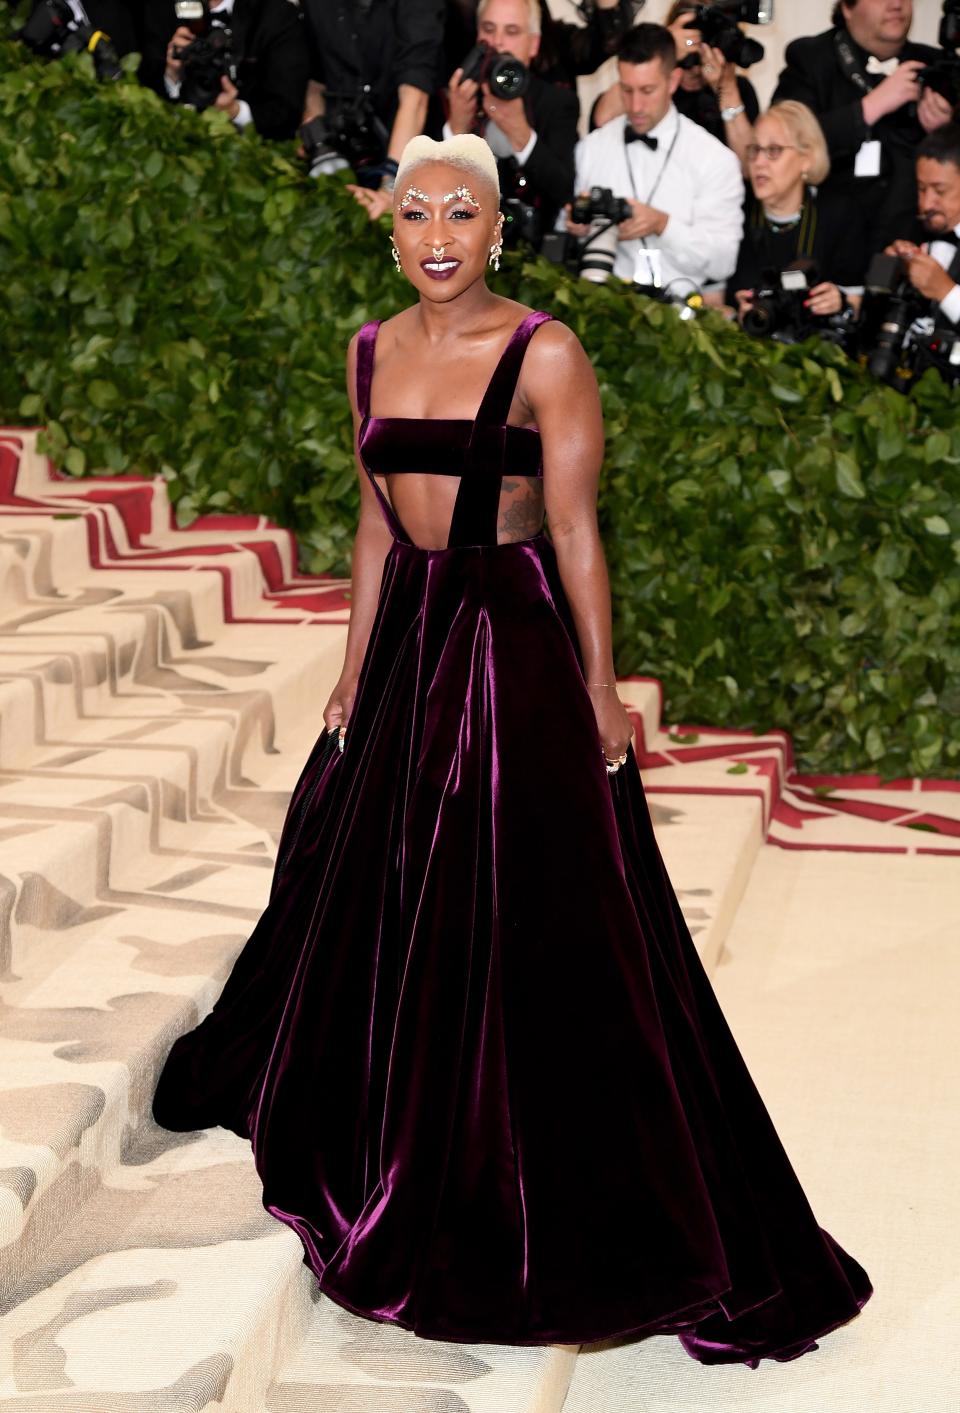 Actress Cynthia Erivo arrived at the Met Gala 2018 with seriously jaw-dropping nails: a rendition of the Sistine Chapel with two black women.